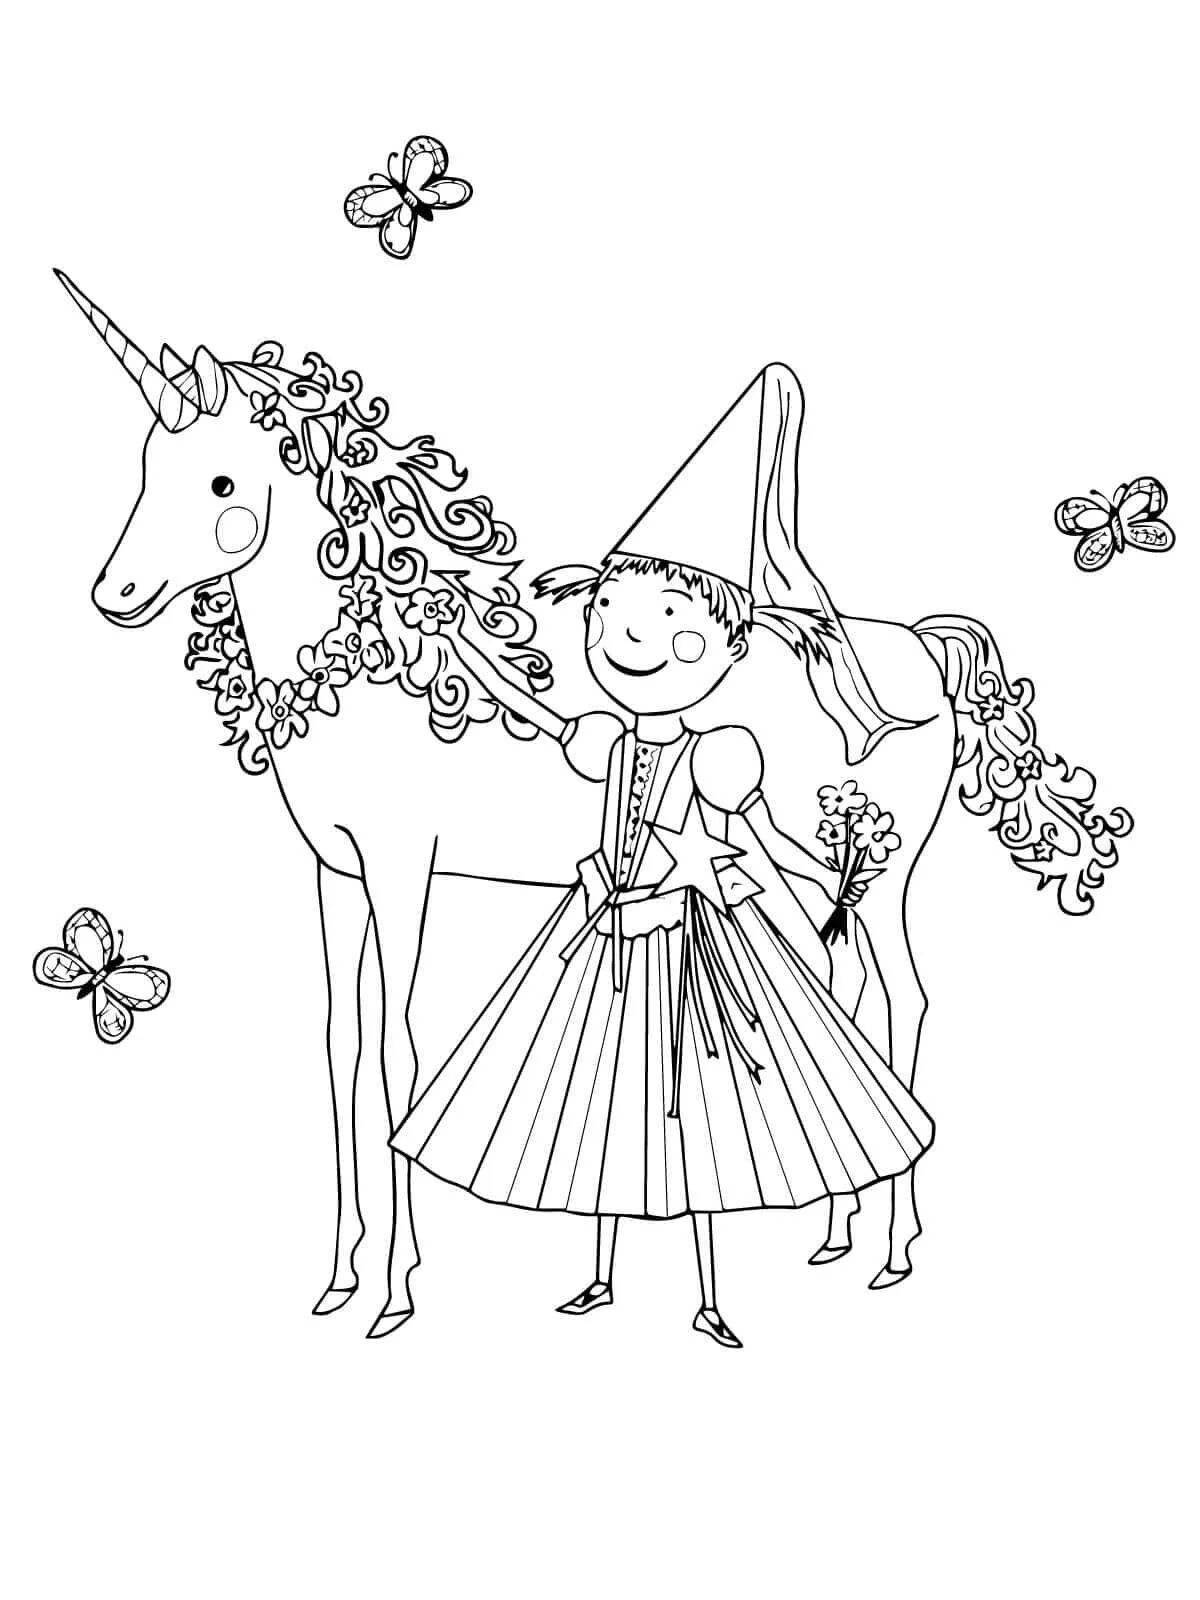 Fabulous coloring pages fairies and unicorns